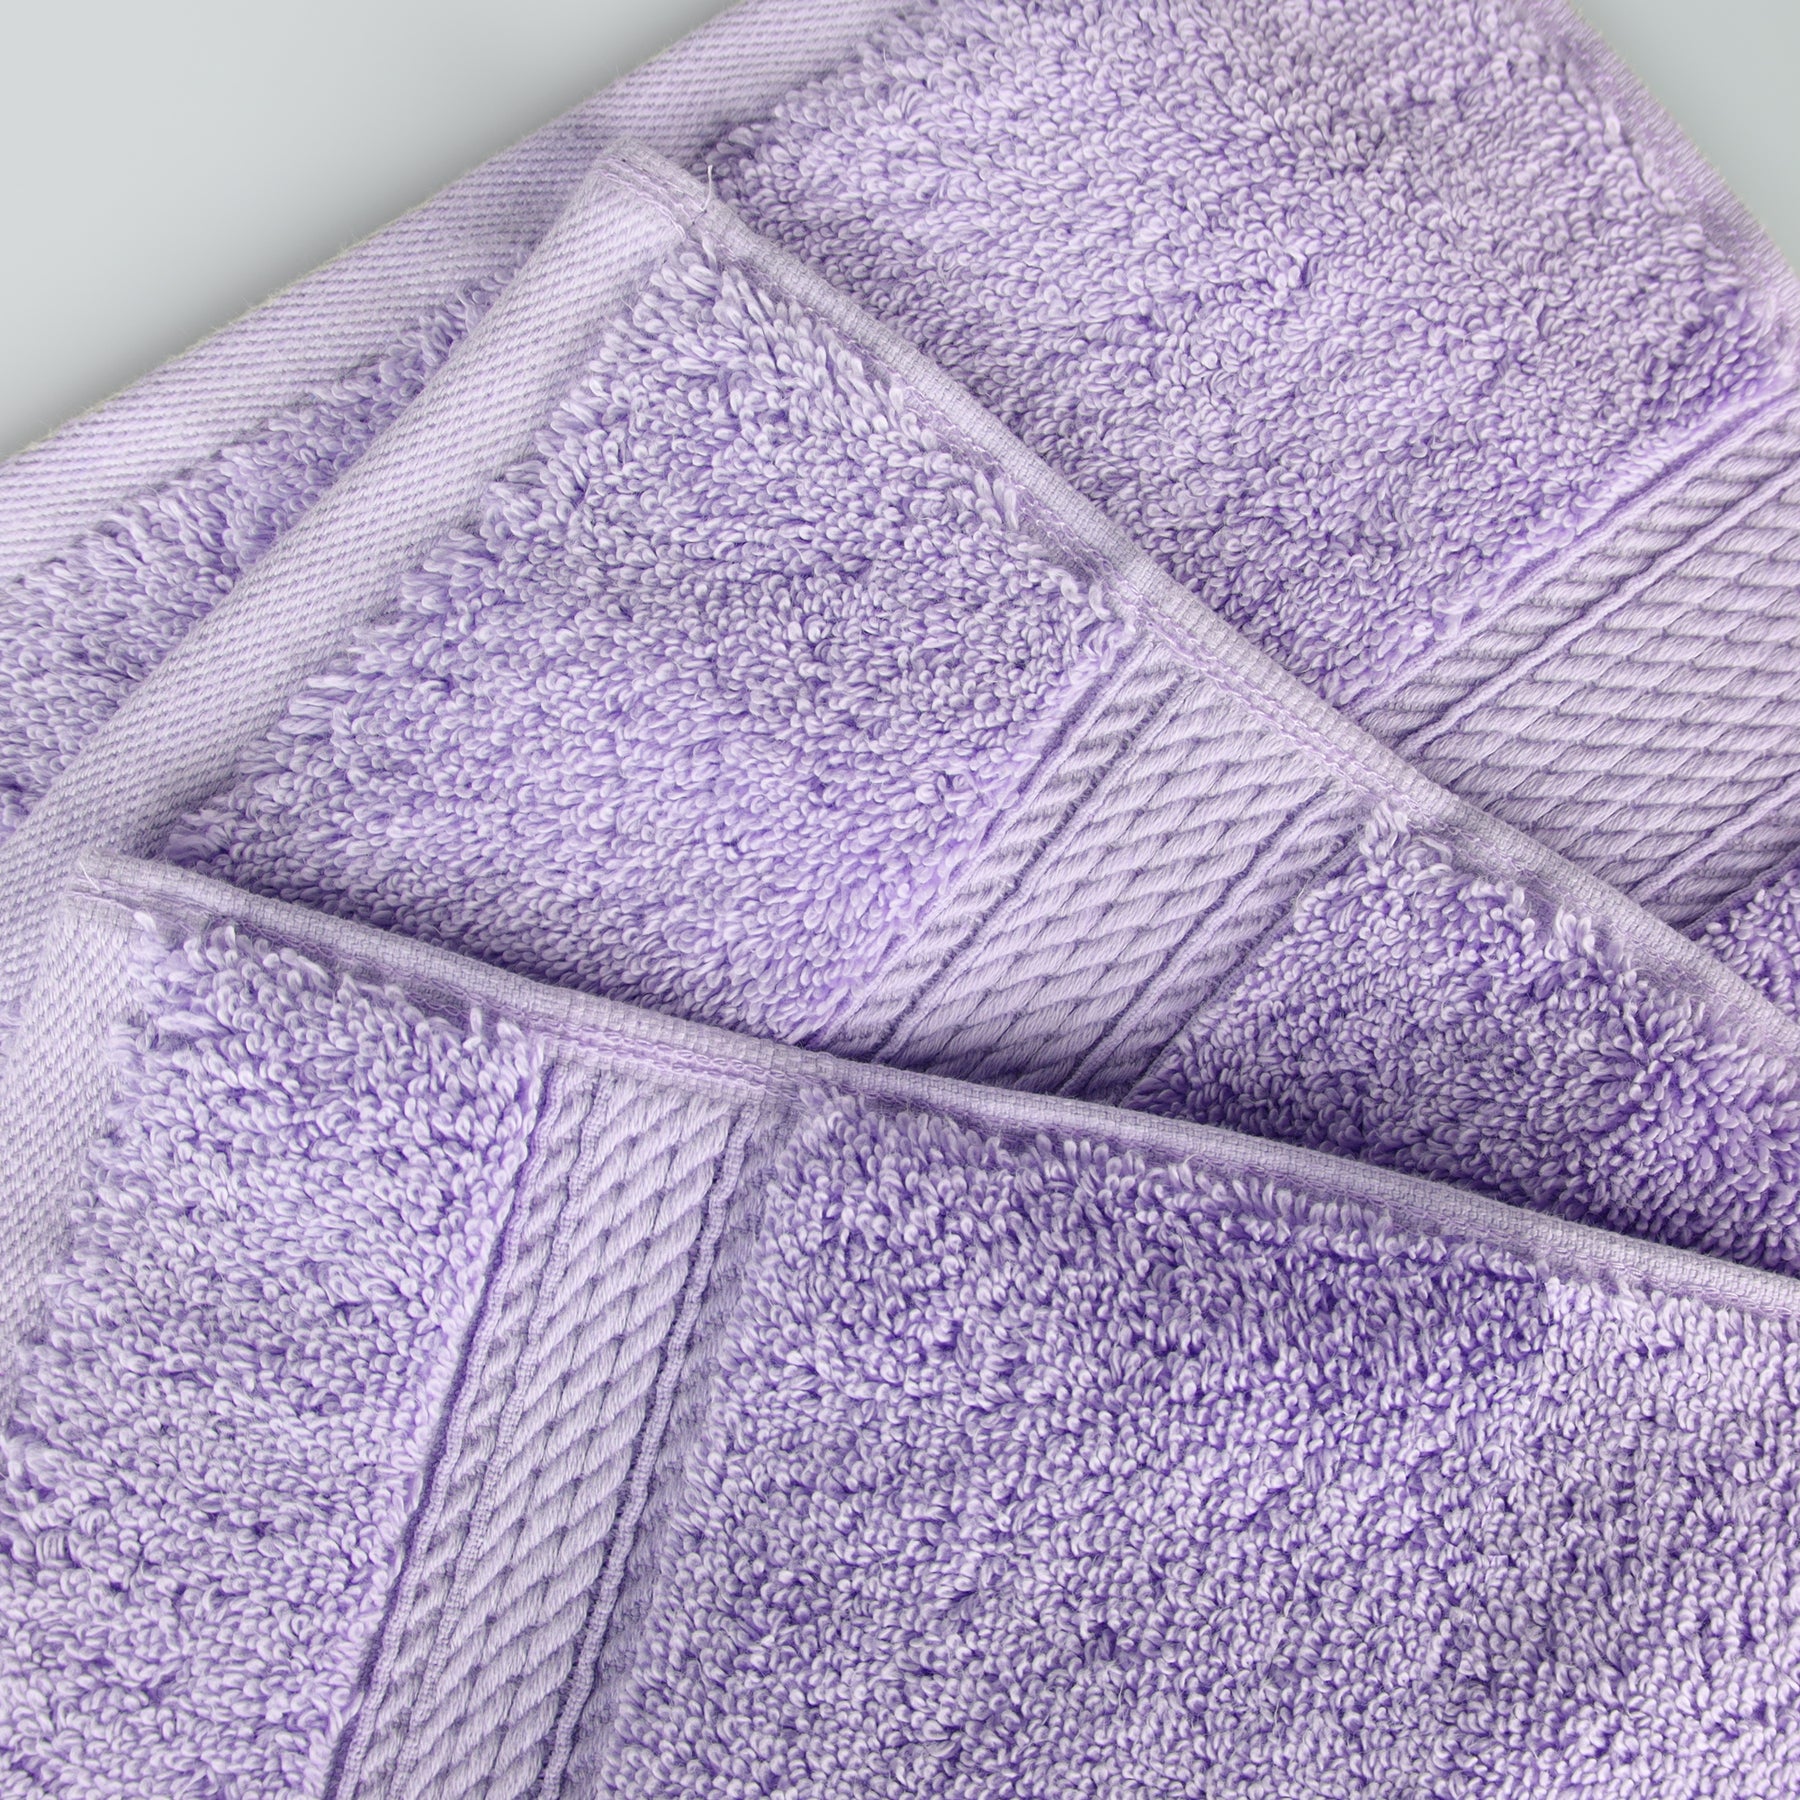 Egyptian Cotton Highly Absorbent 2 Piece Ultra-Plush Solid Bath Sheet Set - Purple